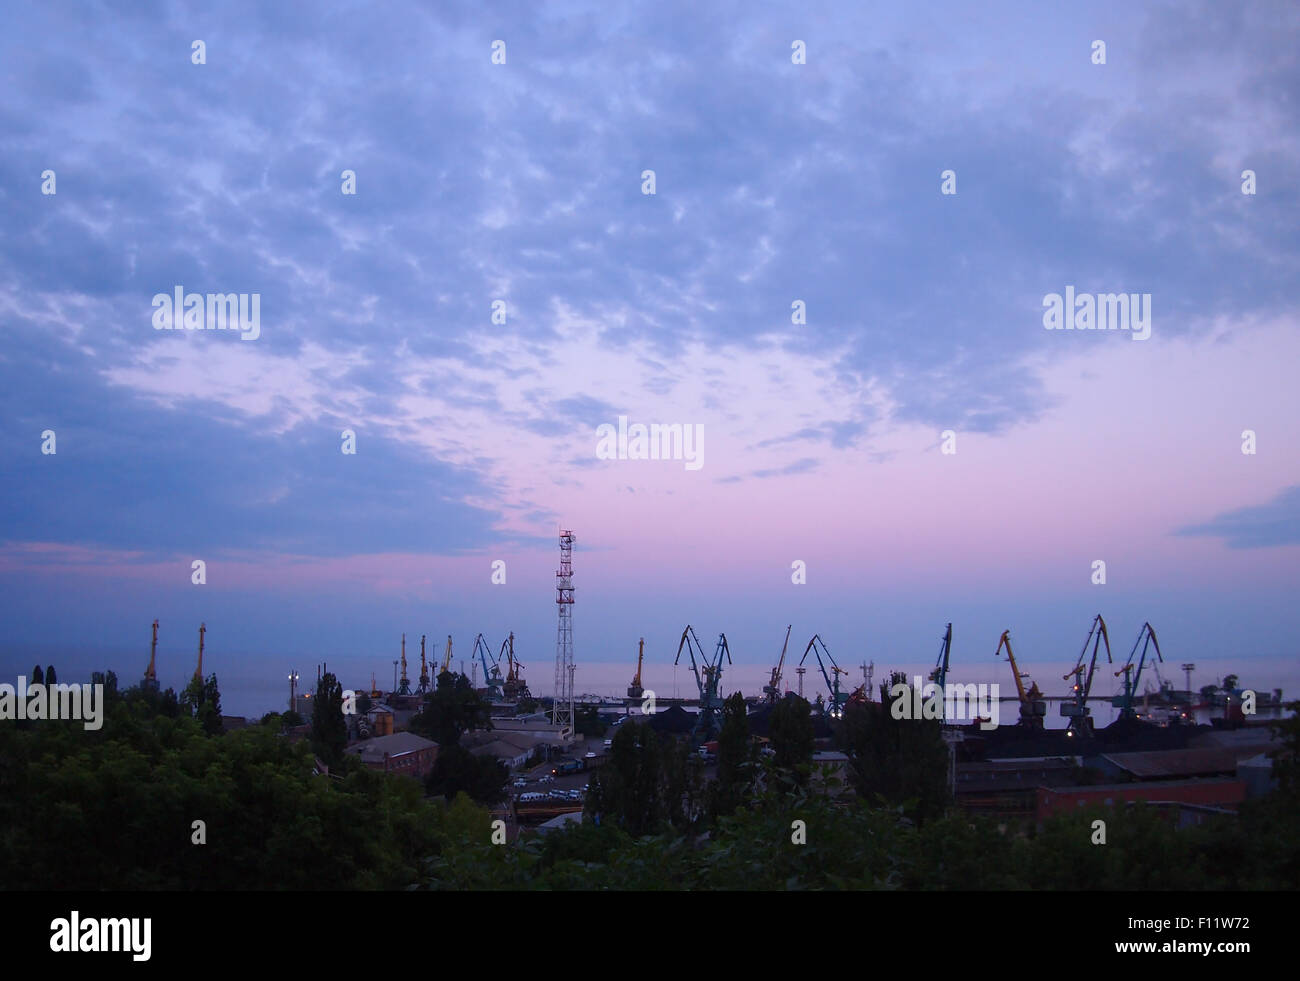 View of a cargo seaport against the evening cloudy sky with wide angle distortion view Stock Photo